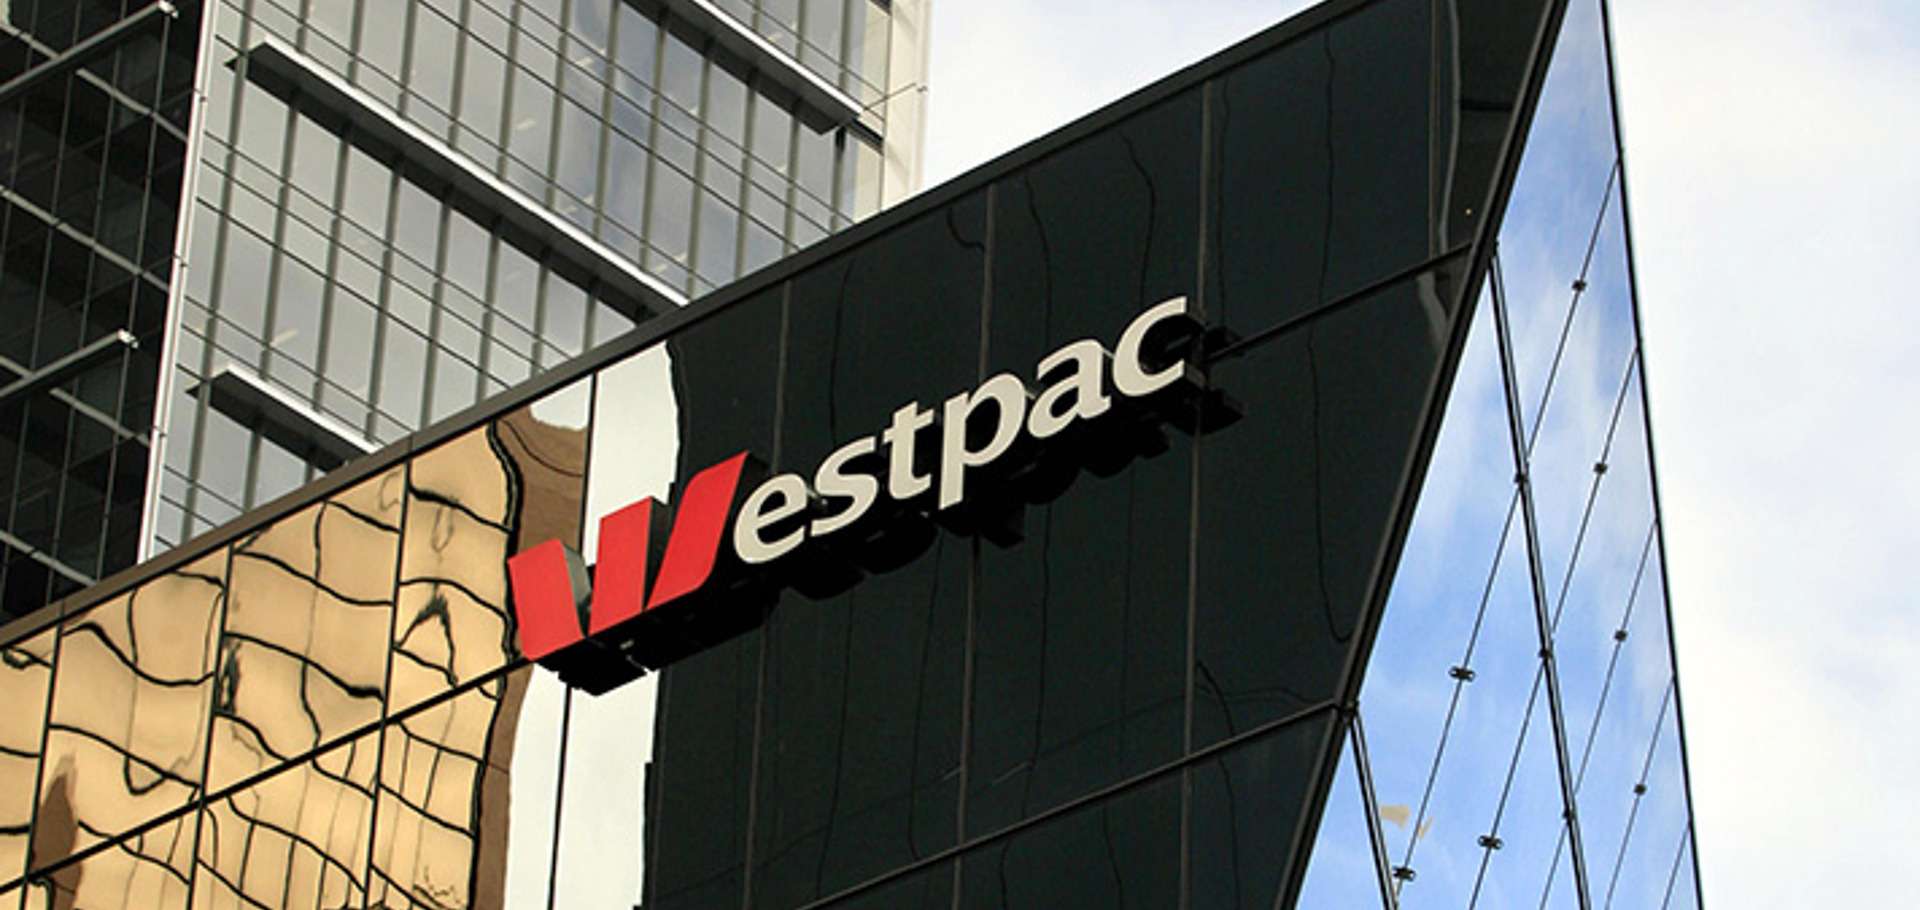 Westpac transforms IT and enables secure, inclusive, flexible work with Windows 11 Enterprise